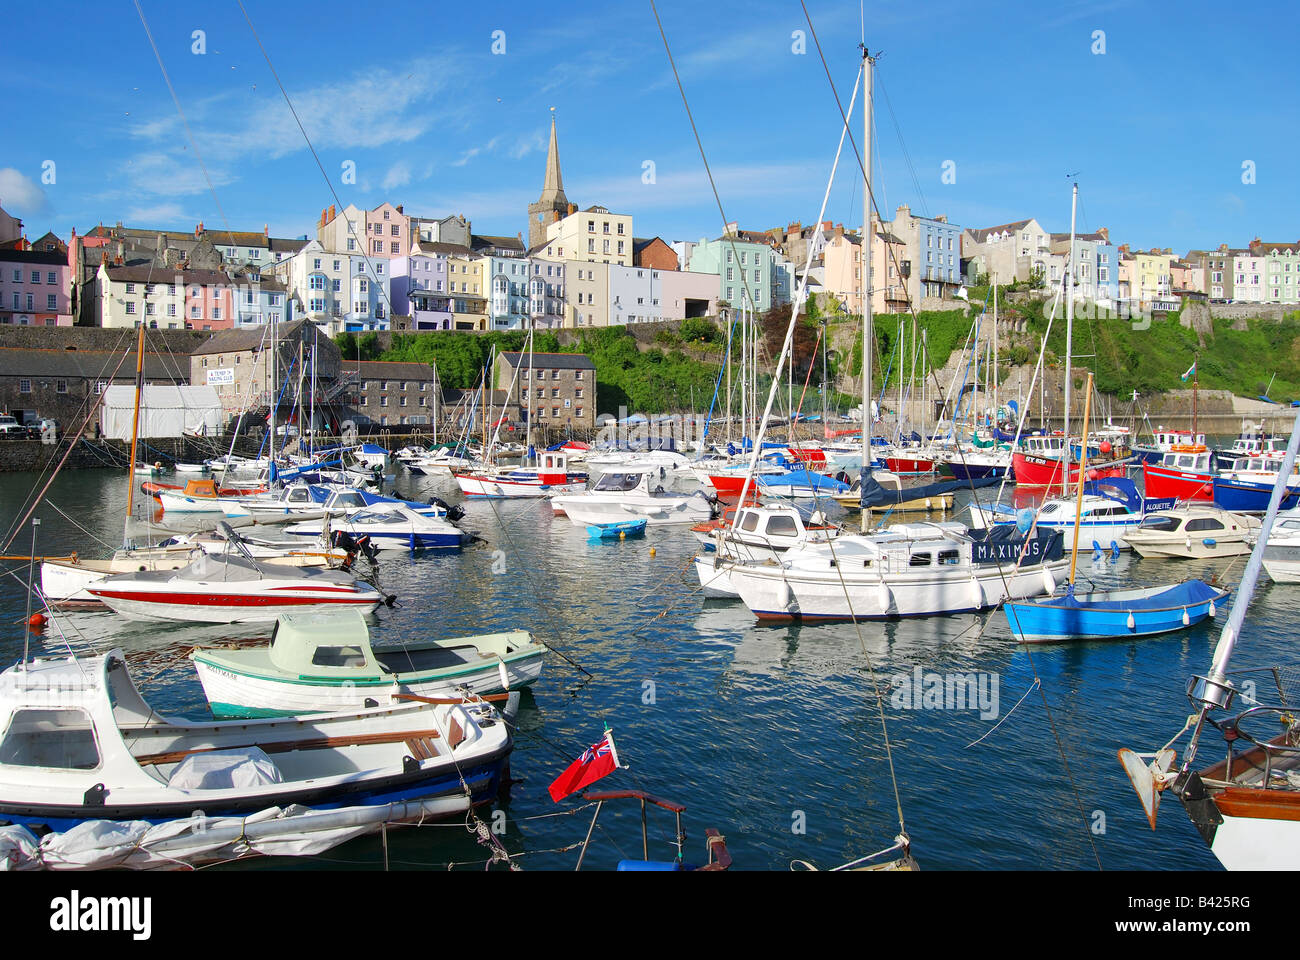 Harbour and town view, Tenby, Carmarthen Bay, Pembrokeshire, Wales, United Kingdom Stock Photo